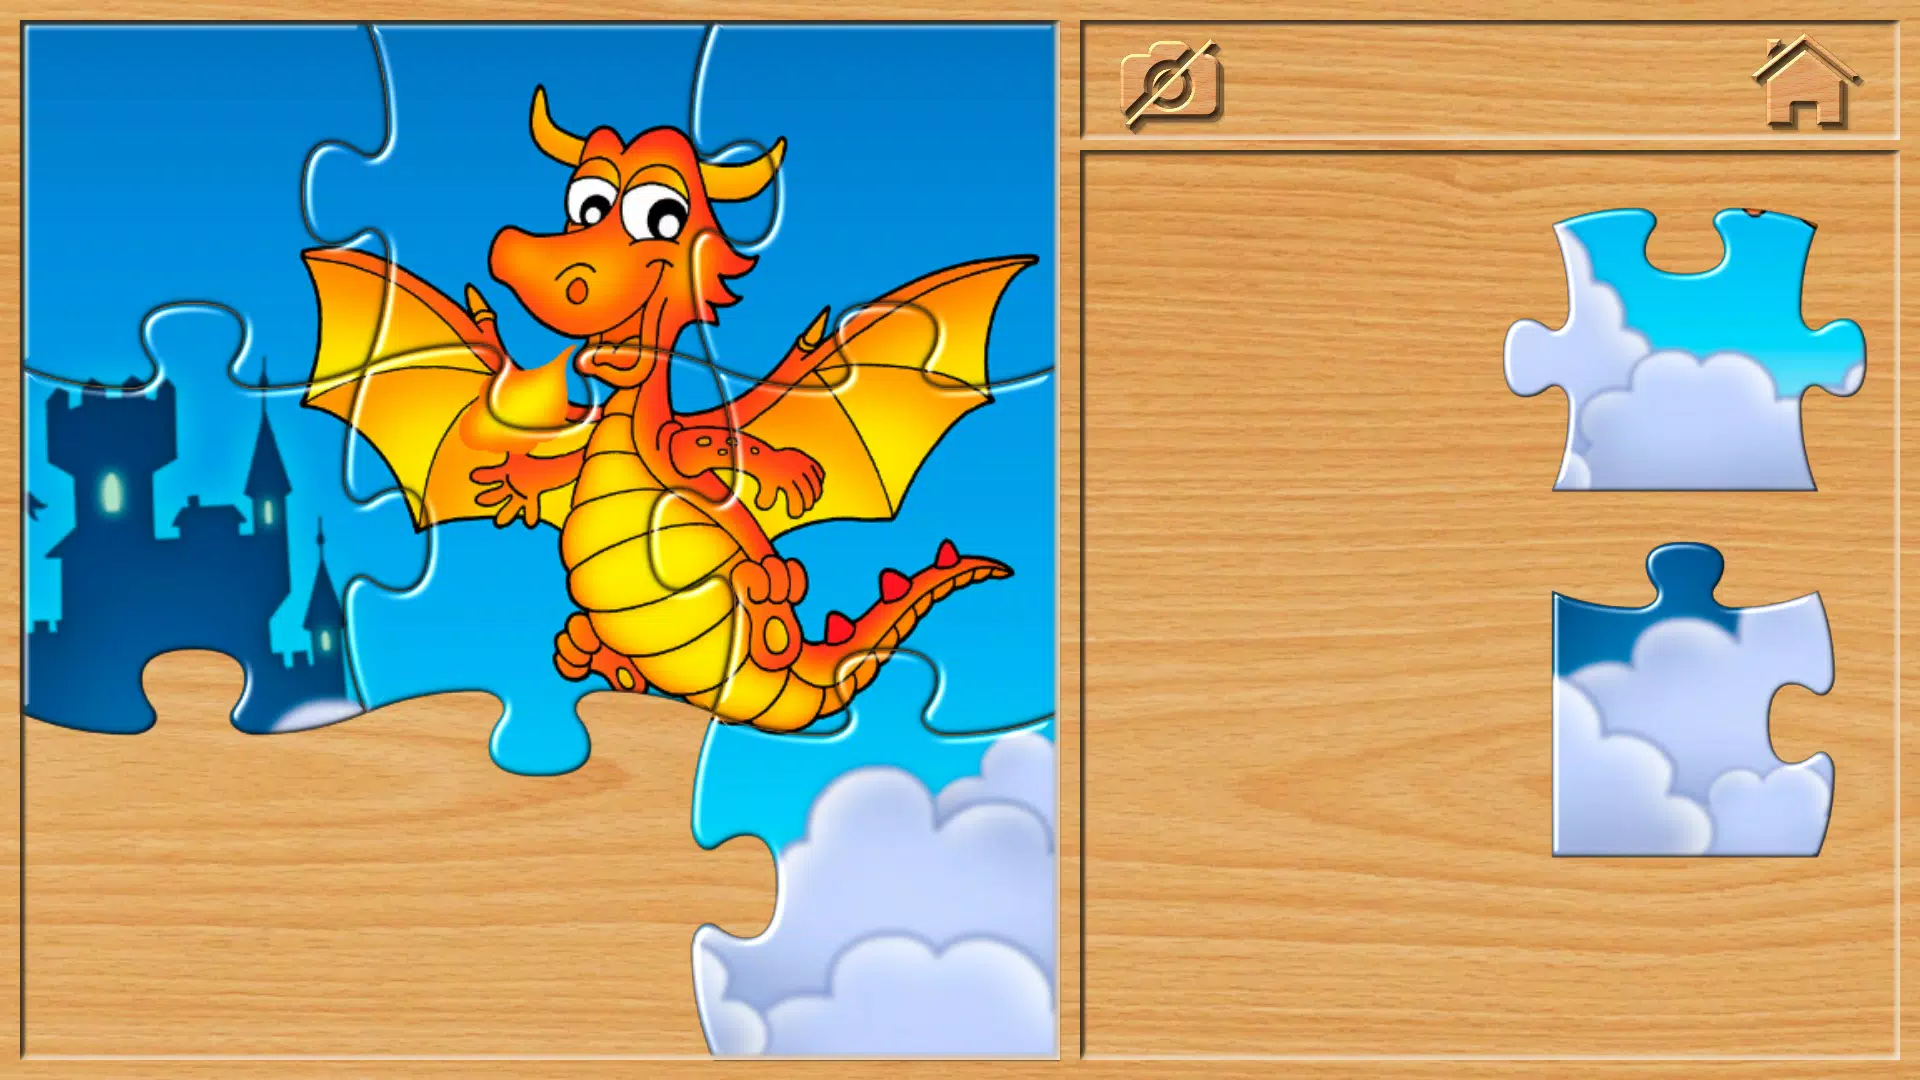  Kids Jigsaw Puzzles [Download] : Software